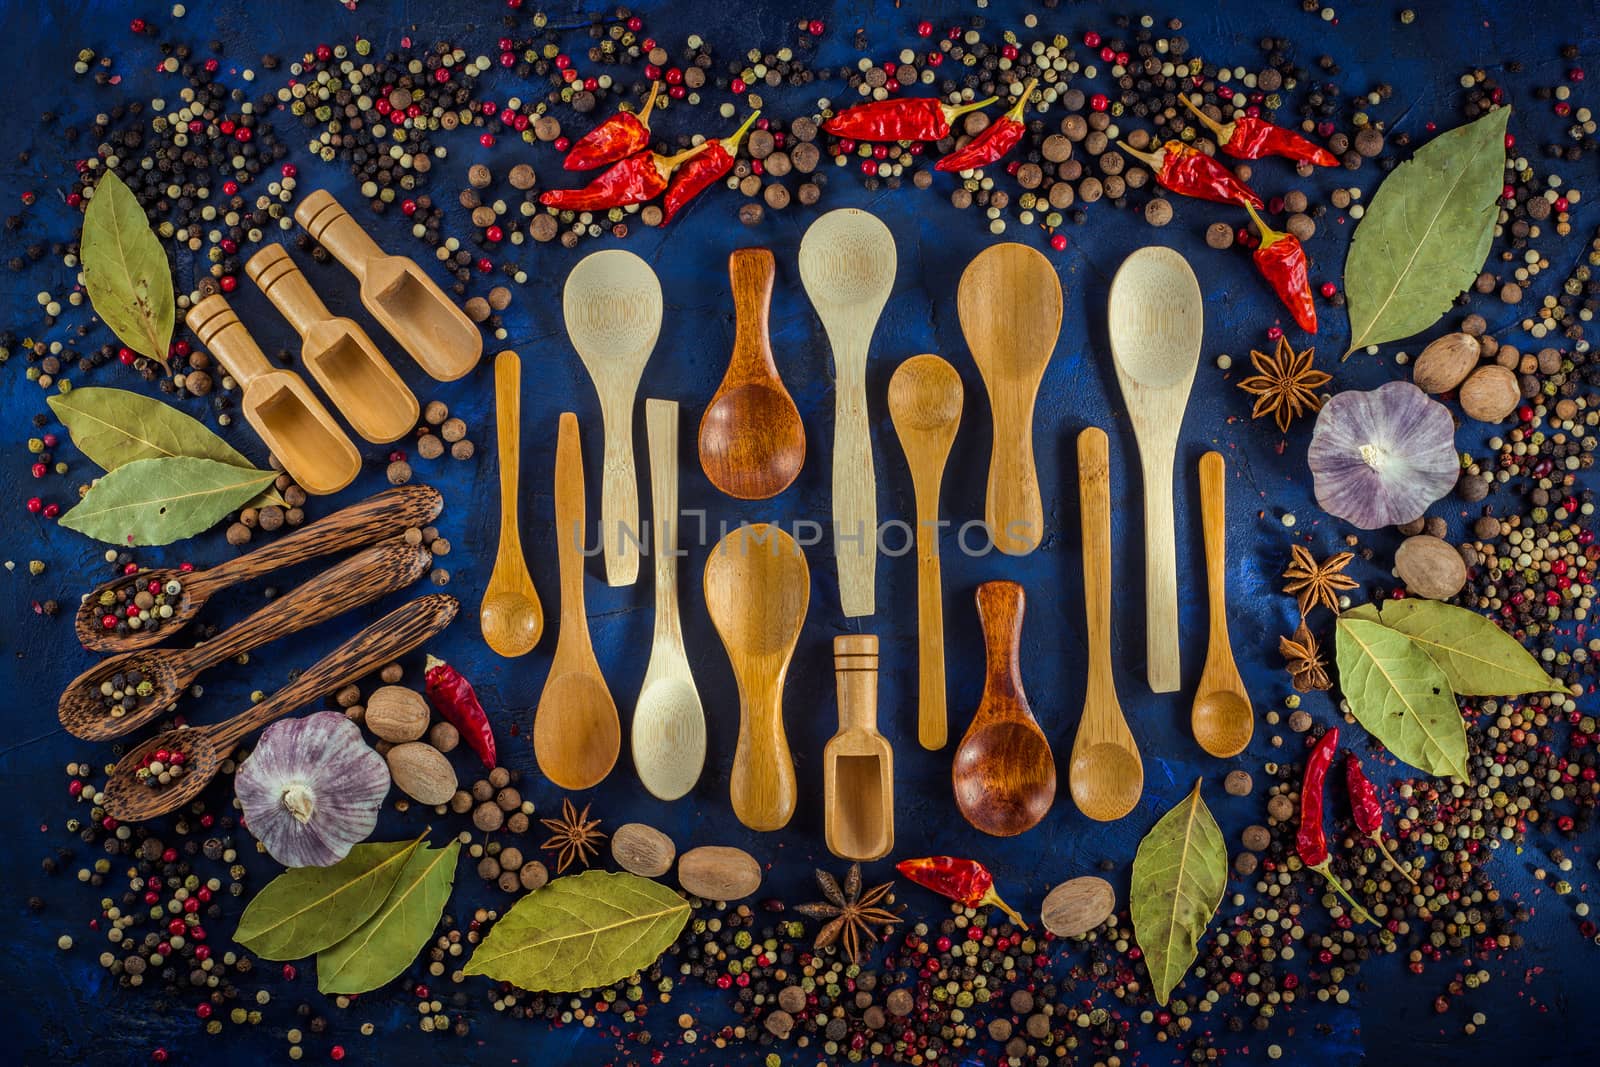 Various spices and wooden spoons on a dark blue background. Spicy background concept with various wooden spoons.  Cooking at home. Top view, close up, flat-lay.